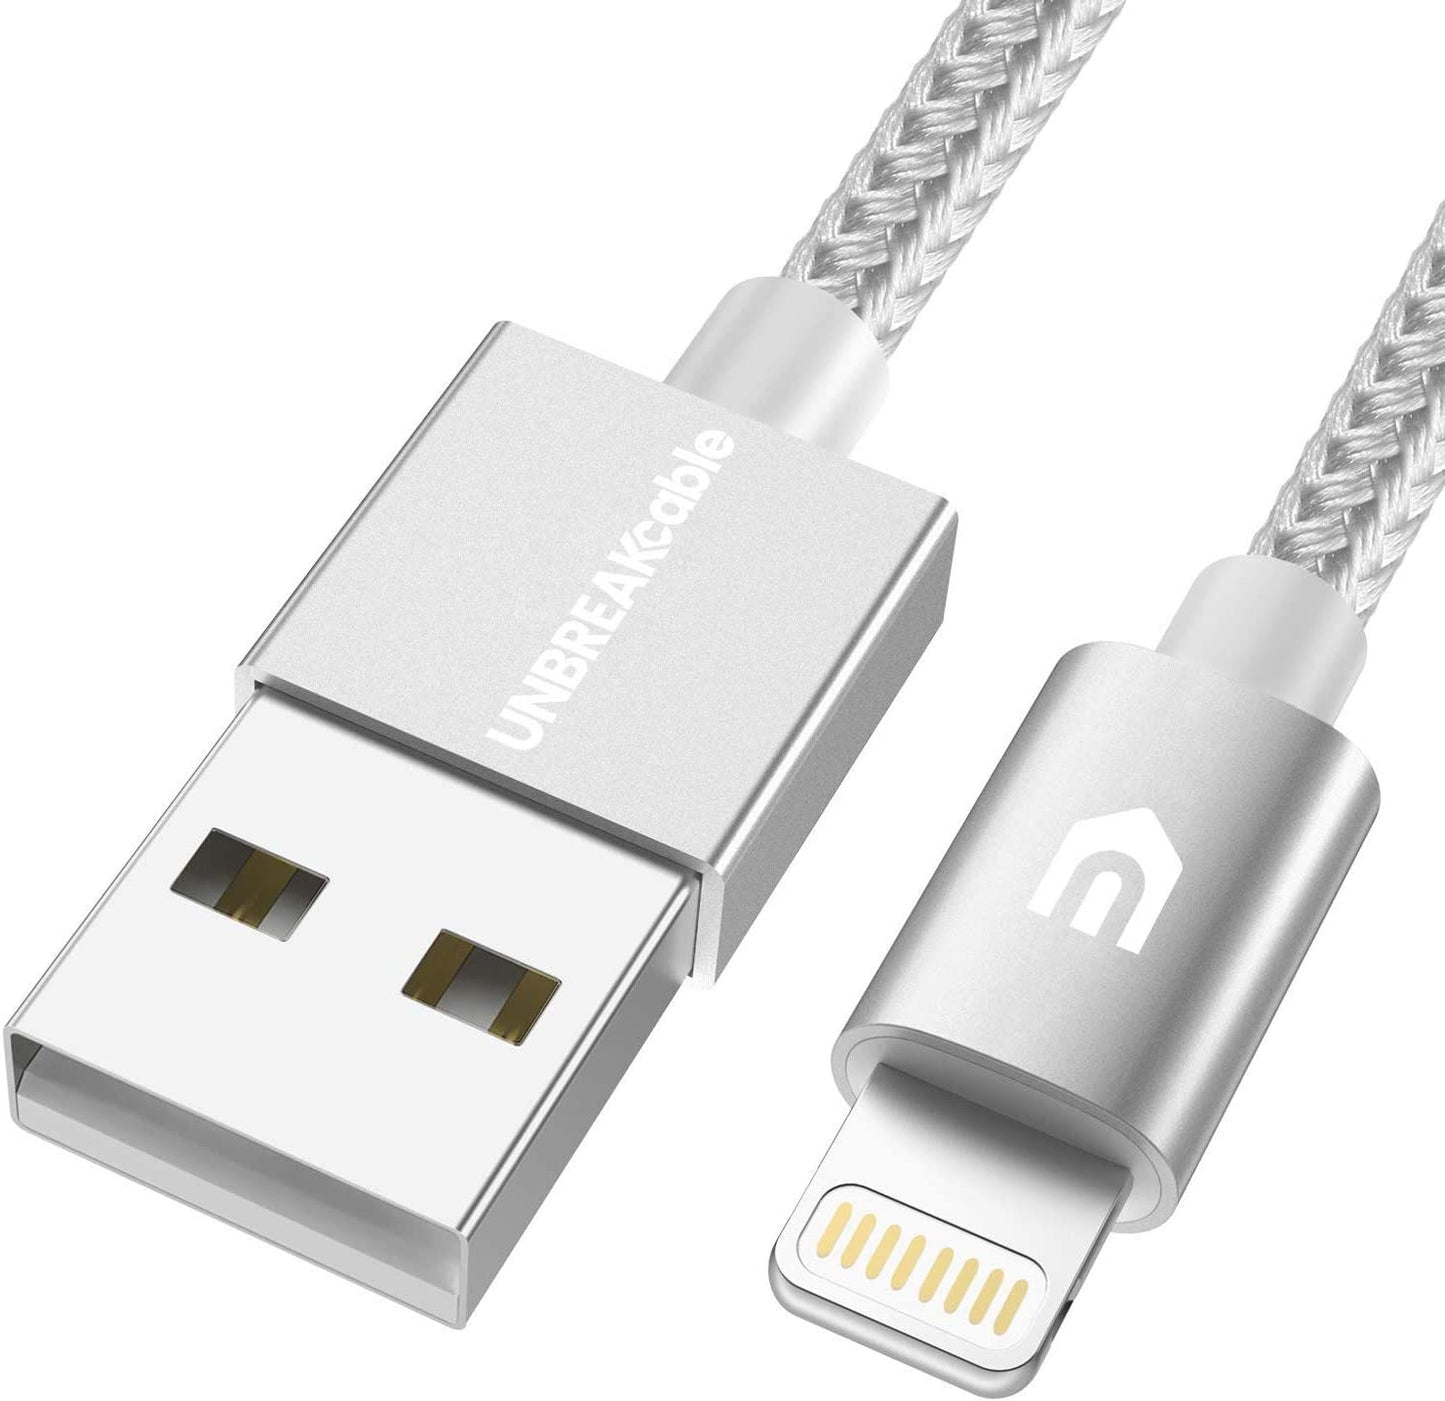 UNBREAKcable Lightning iPhone Charger Cable - [Apple MFi Certified] 3.3ft/1m Nylon Braided Apple Charger Lead USB Fast Charging Cable